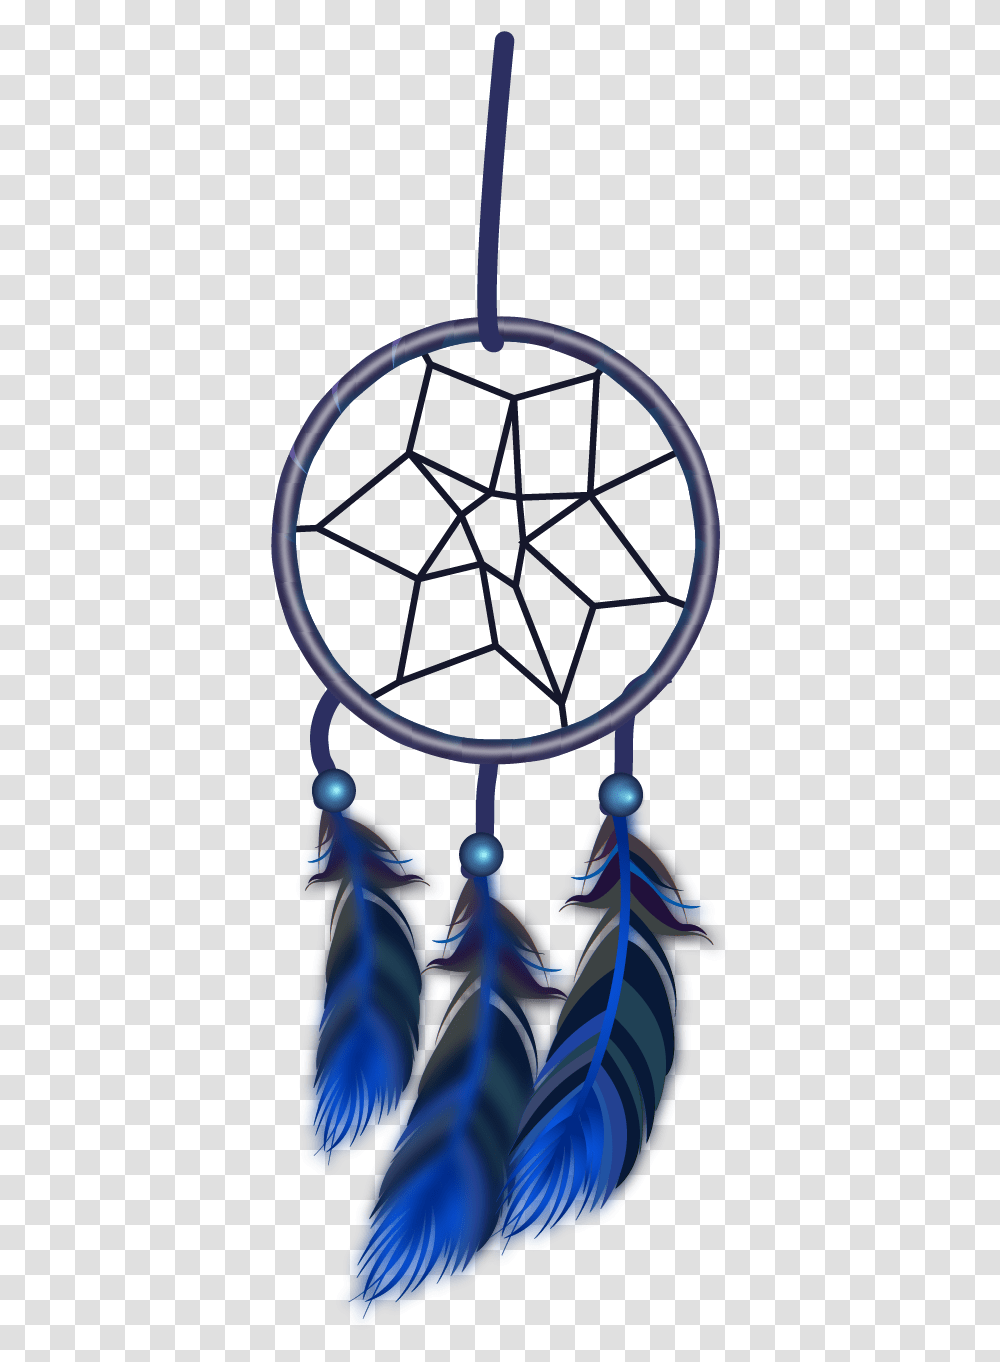 Dreamcatcher Feather Wind Chimes Dream Catcher Feather, Ornament, Accessories, Accessory, Necklace Transparent Png